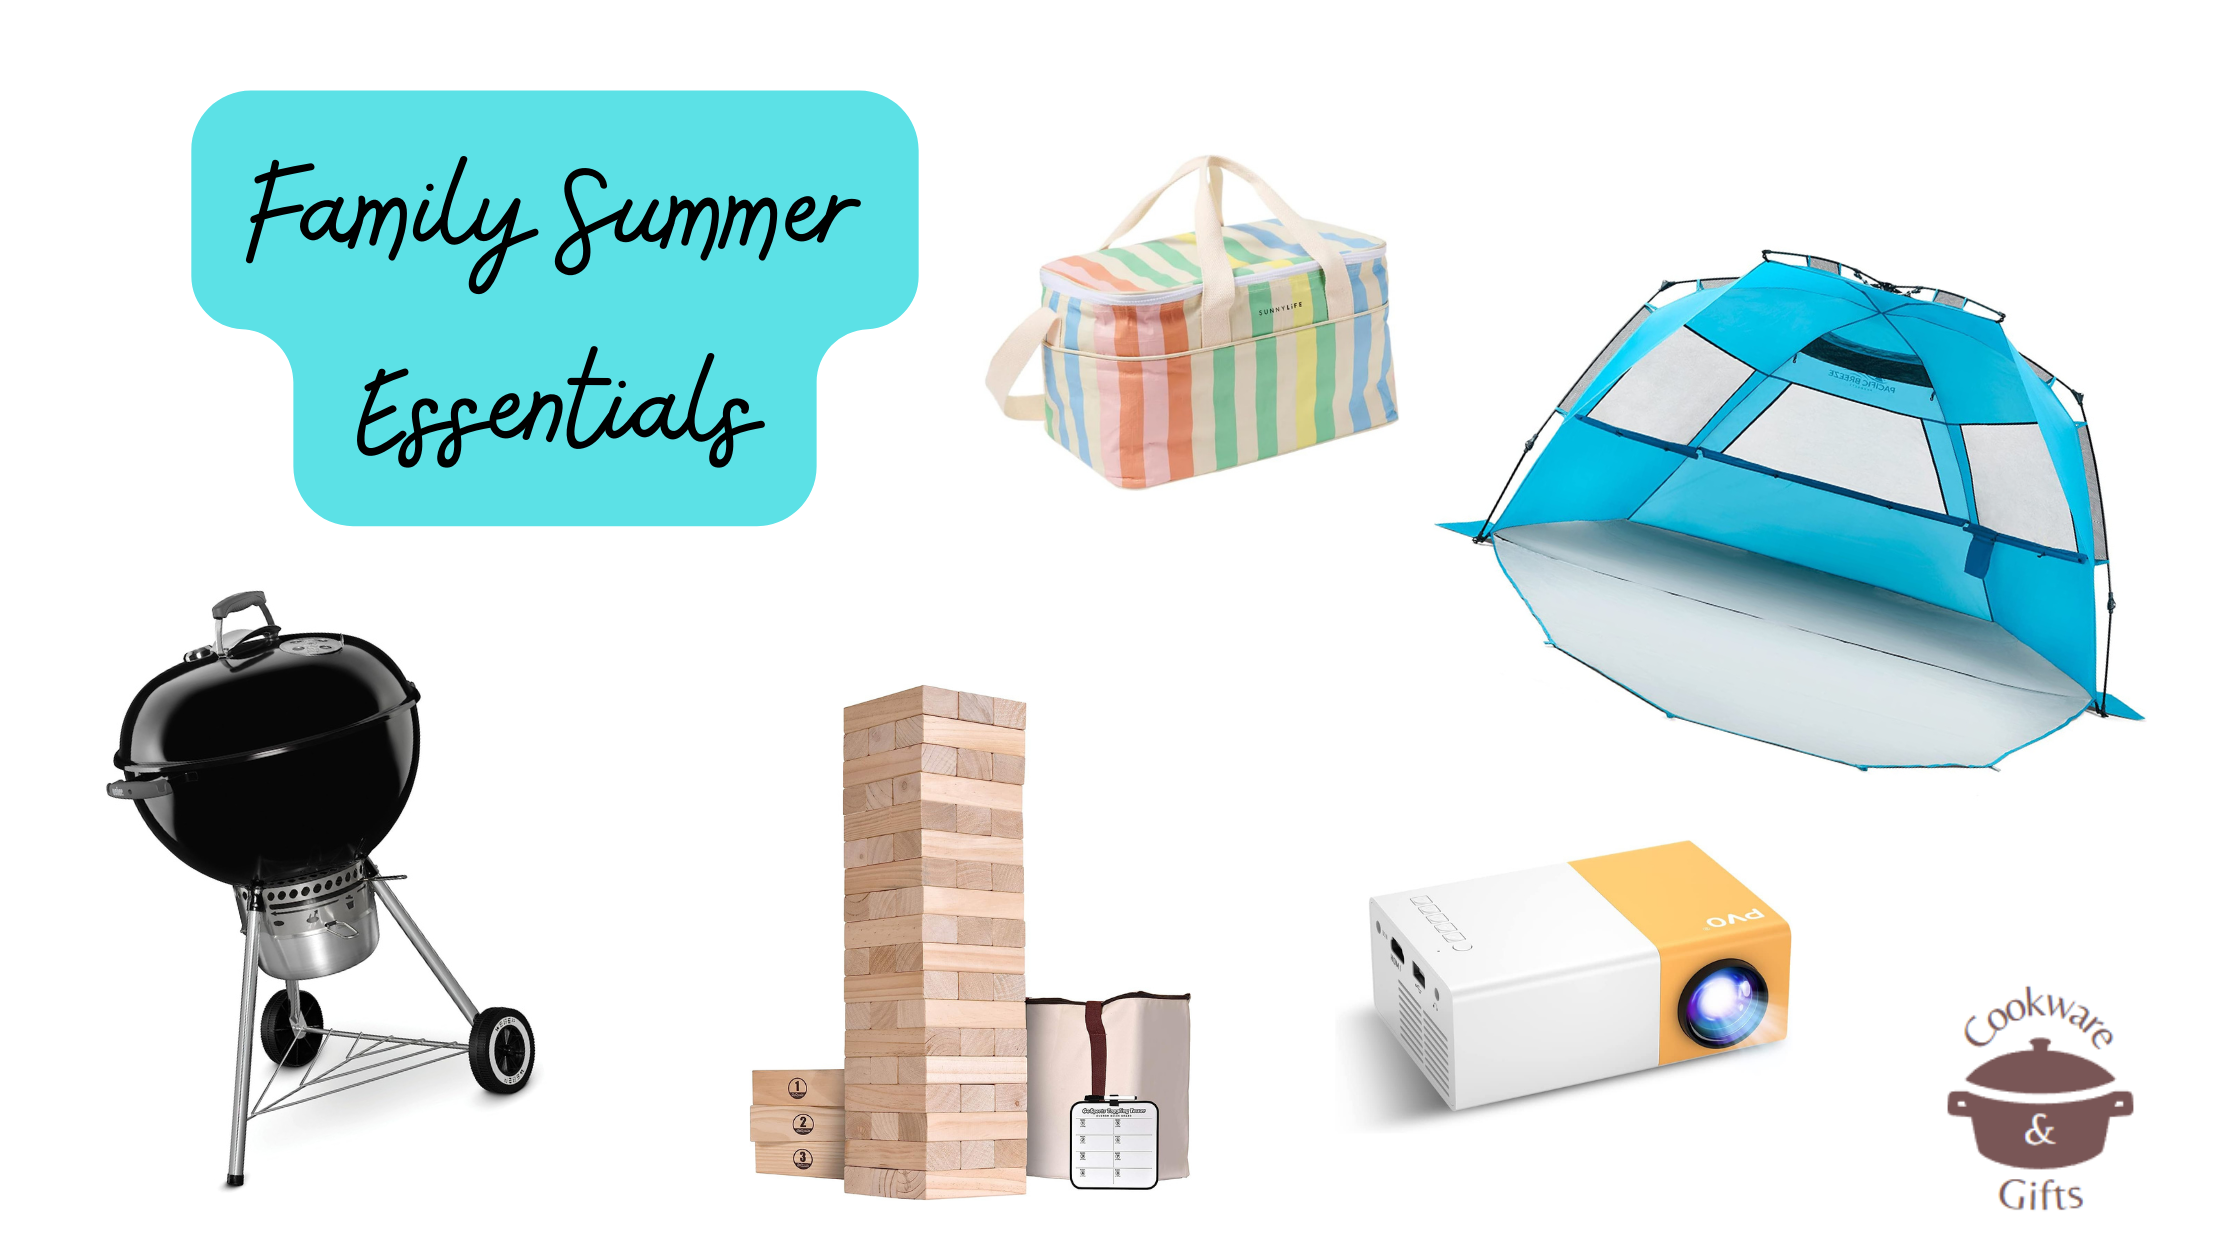 10 Essential Items for a Fun-Filled Family Summer